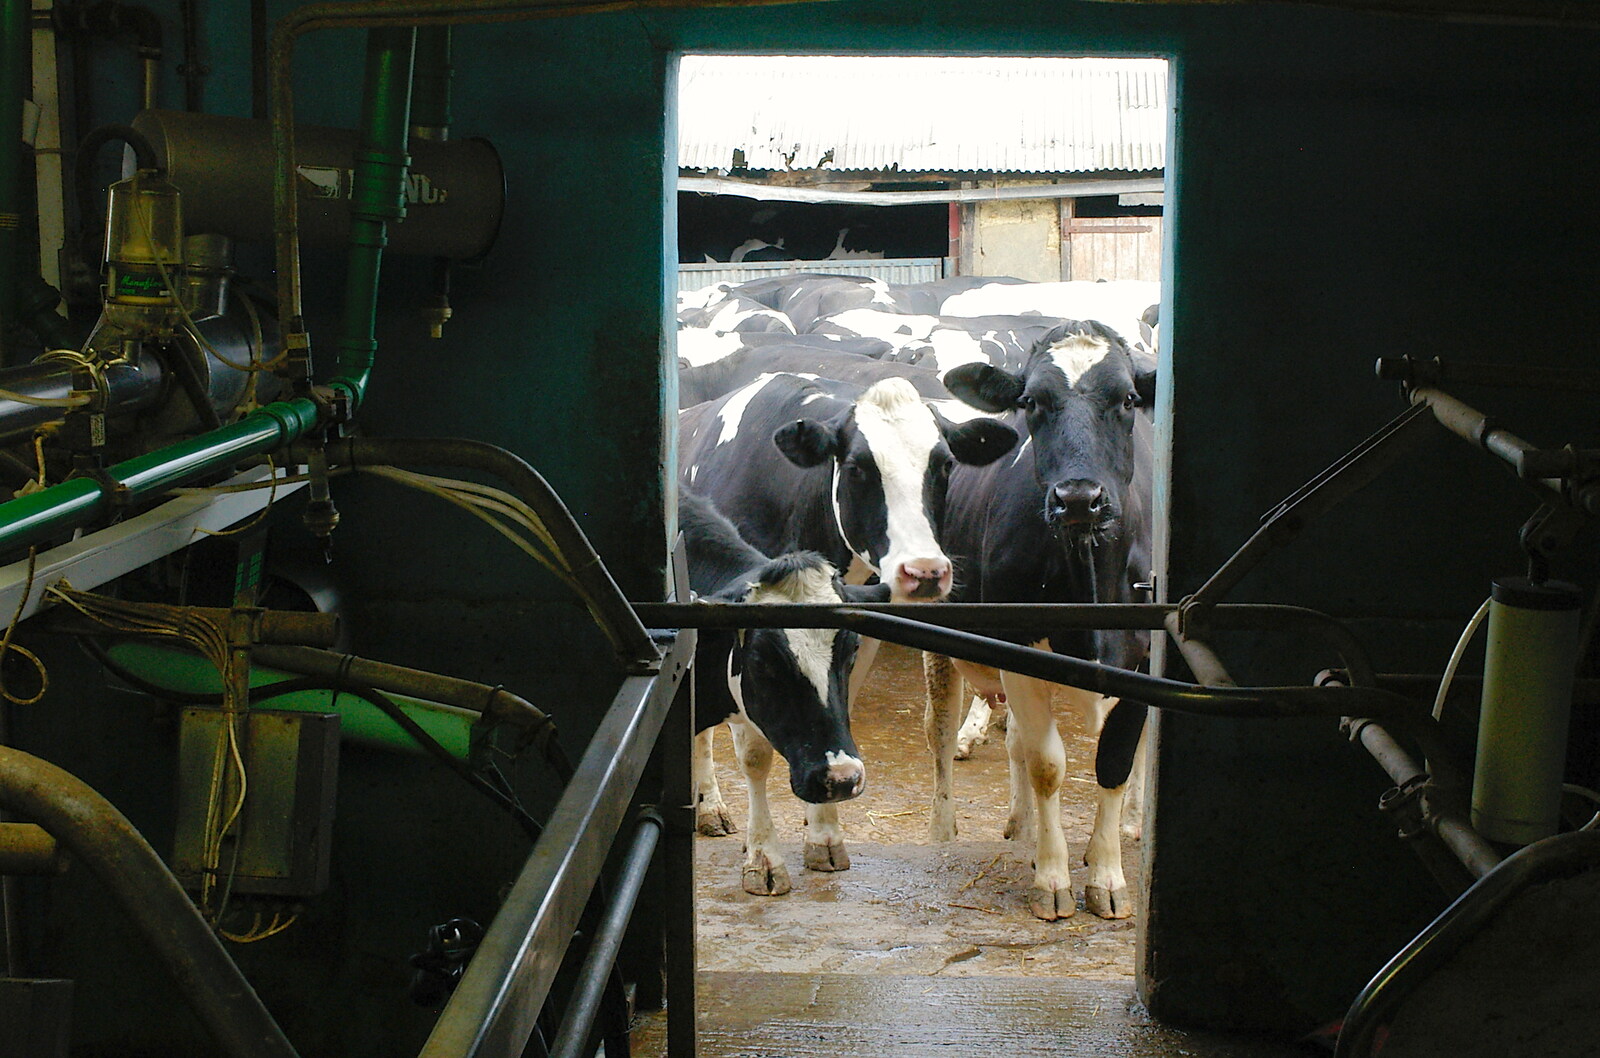 The rest of the cows look in from Wavy and the Milking Room, Dairy Farm, Thrandeston, Suffolk - 28th March 2005